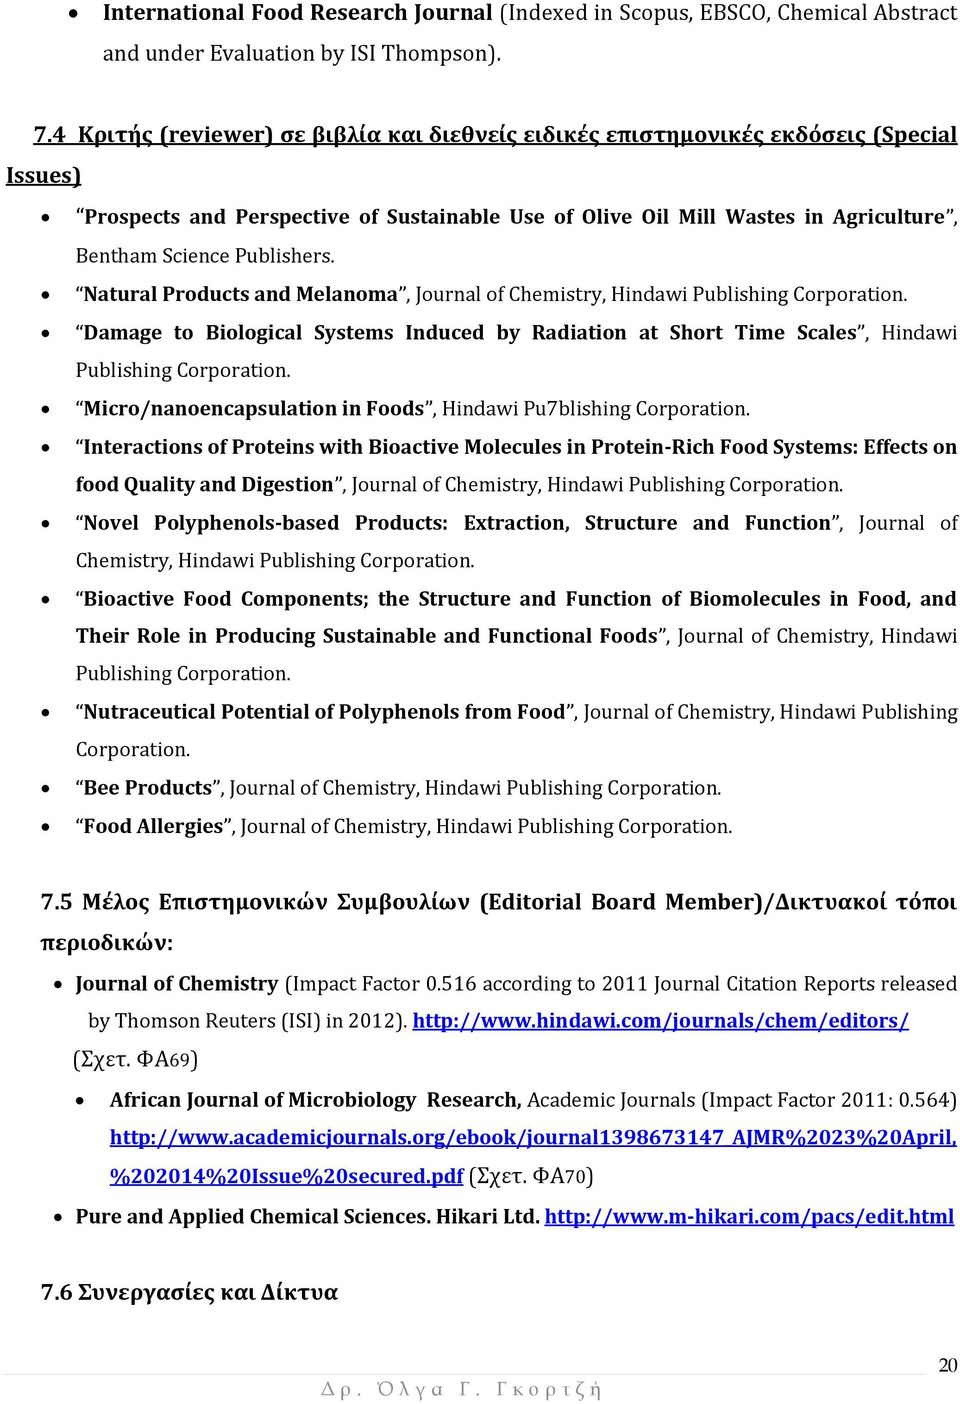 Publishers. Natural Products and Melanoma, Journal of Chemistry, Hindawi Publishing Corporation. Damage to Biological Systems Induced by Radiation at Short Time Scales, Hindawi Publishing Corporation.